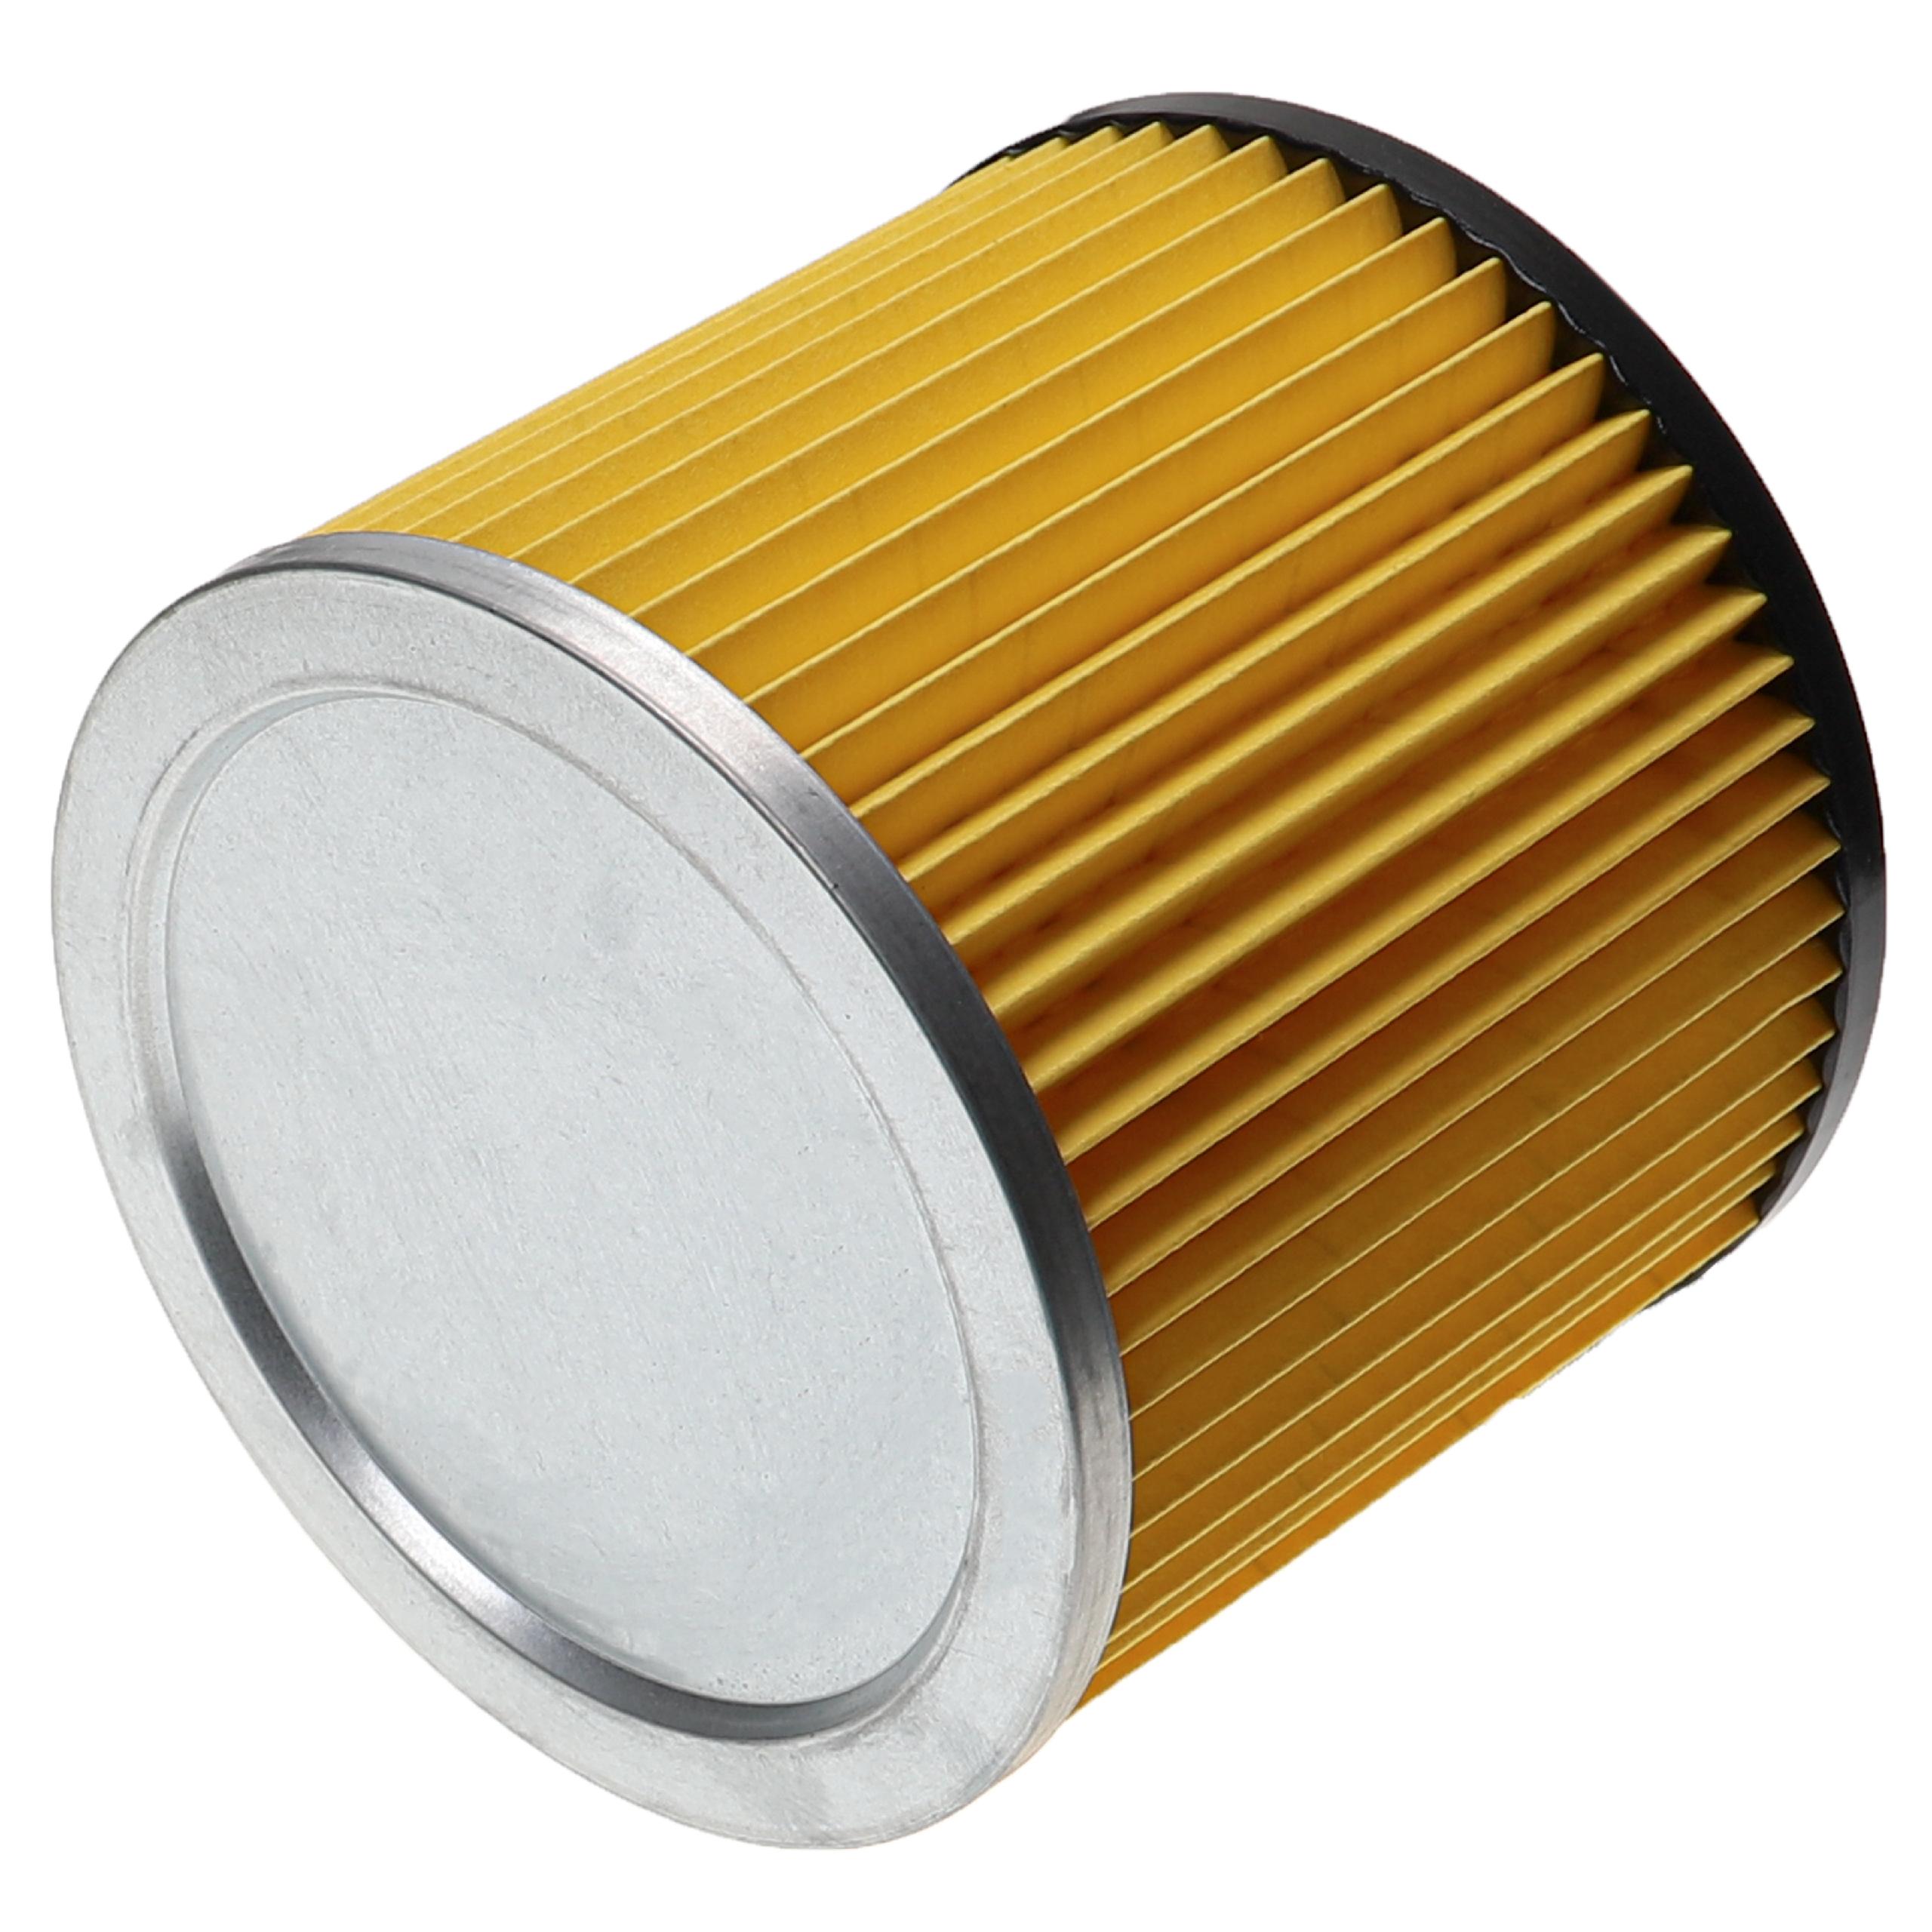 Filter as Replacement for Scheppach Filter 75100701 Suitable for Güde, Scheppach, Woodster, KITY Suction Unit